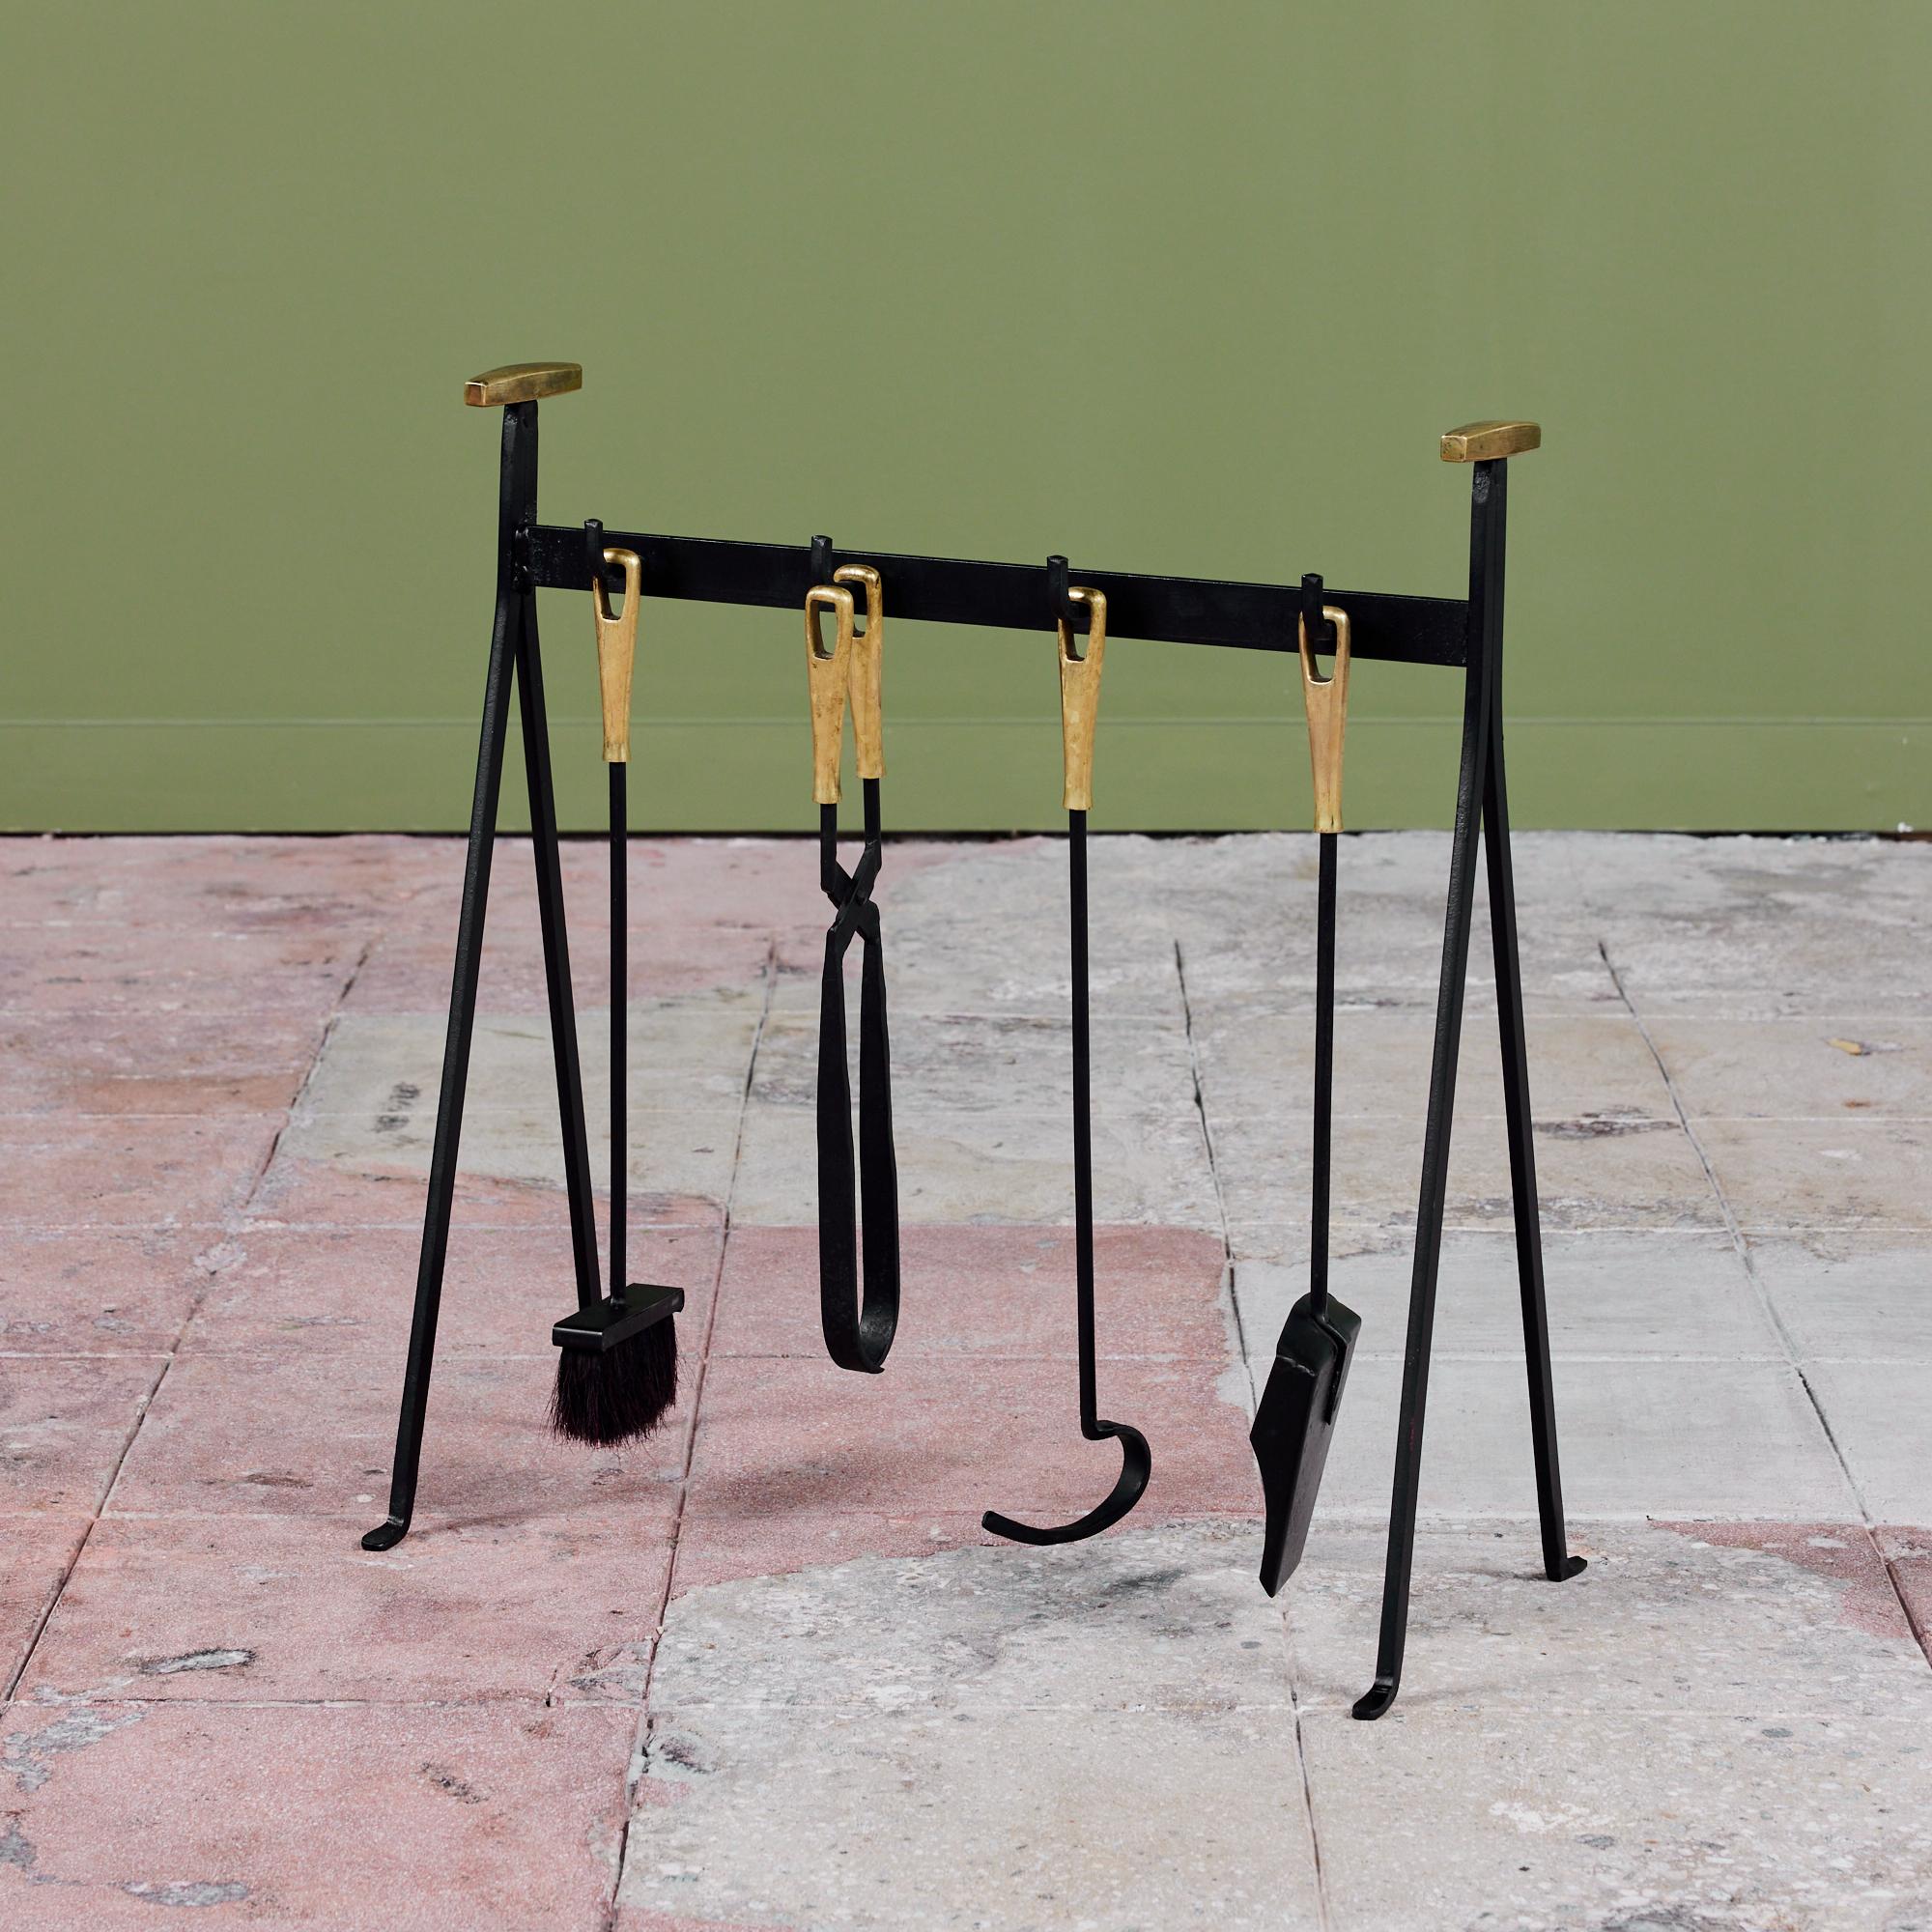 Four piece set of fireplace tools with stand from notable Danish retailer Illums Bolighus located in Copenhagen. The set features four tools each with a brass handle on a triangular stand. All elements are made of blackened iron. This modernist